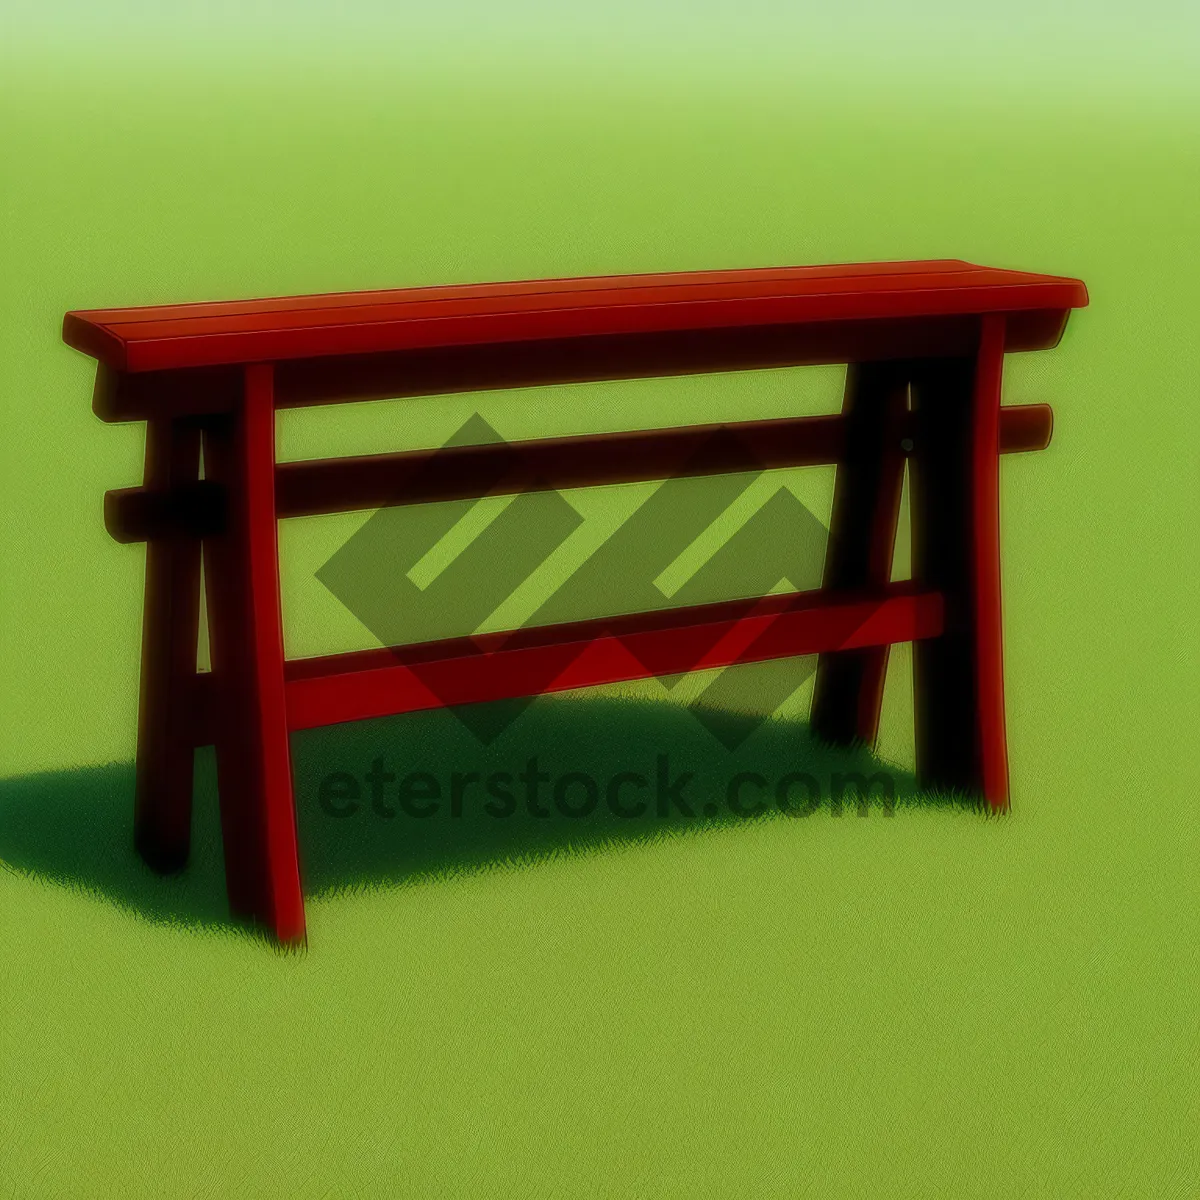 Picture of Wooden Step Stool - Versatile Furniture for Interior Spaces